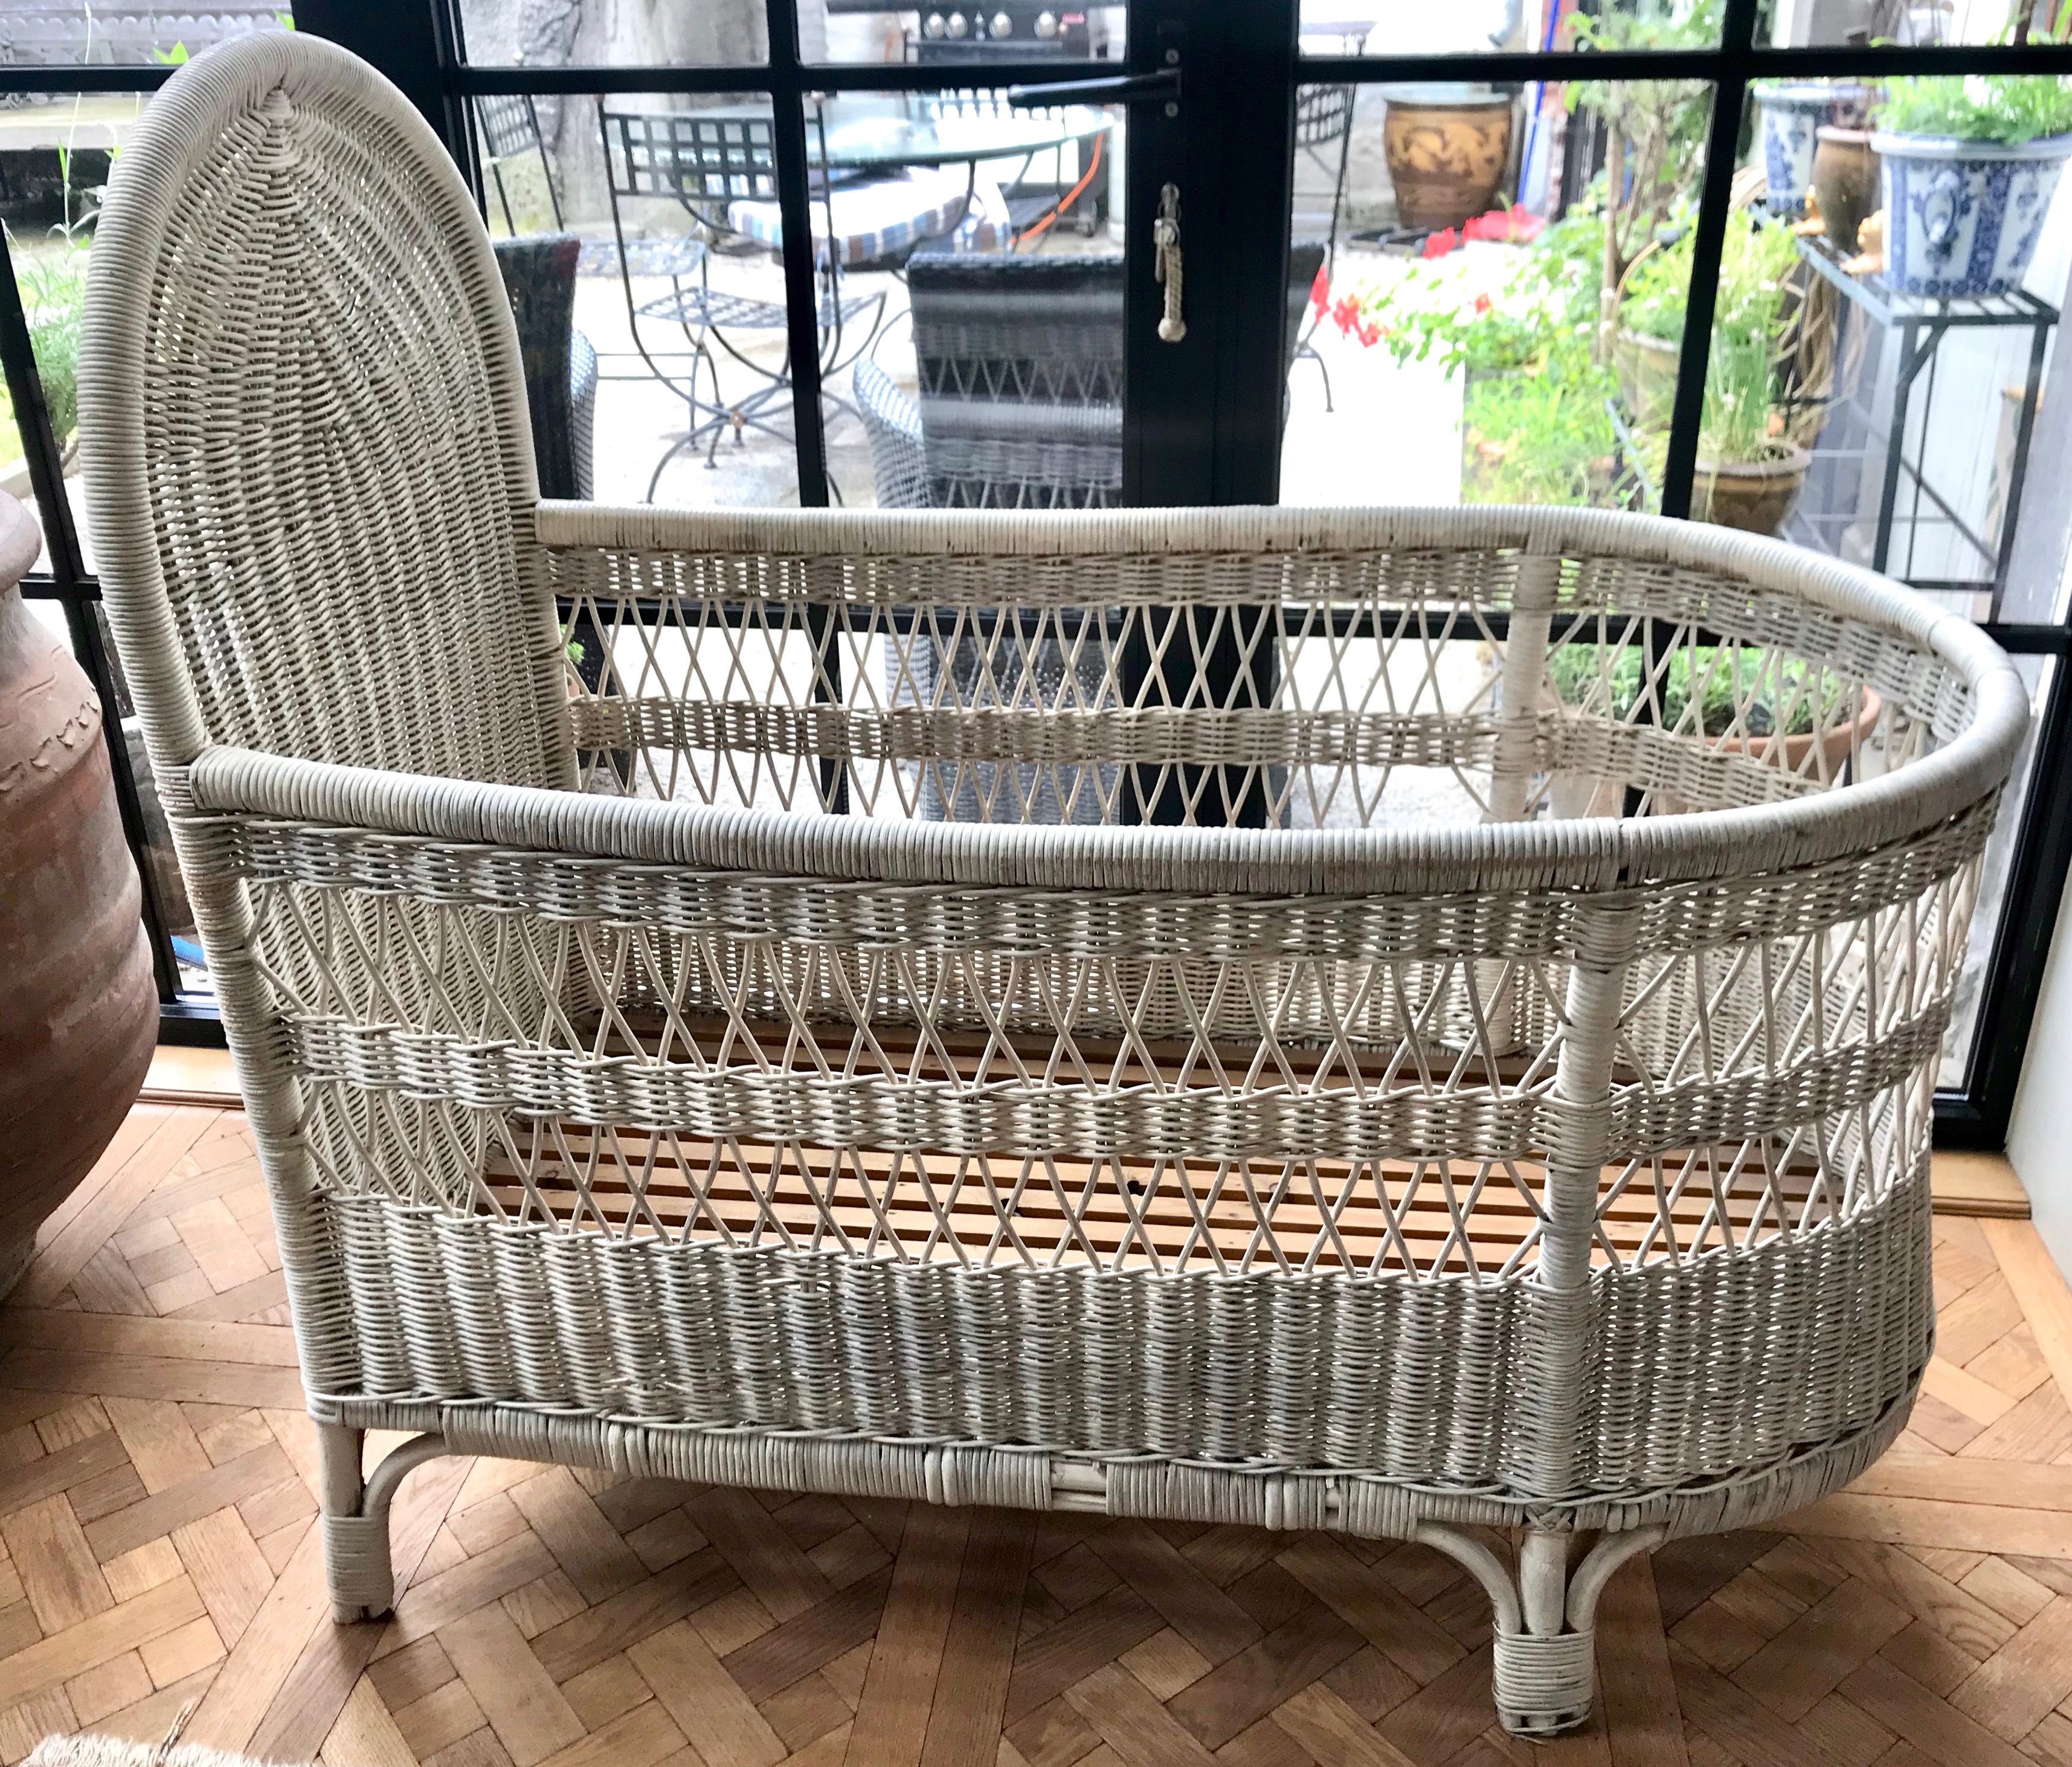 French wicker baby bed/ crib. Safe to use for a baby since there are no large spaces, but as with all cribs a bumper pad should be used (standard size will fit) 
There are some small missing pieces as shown in the photos, and it is not painted on